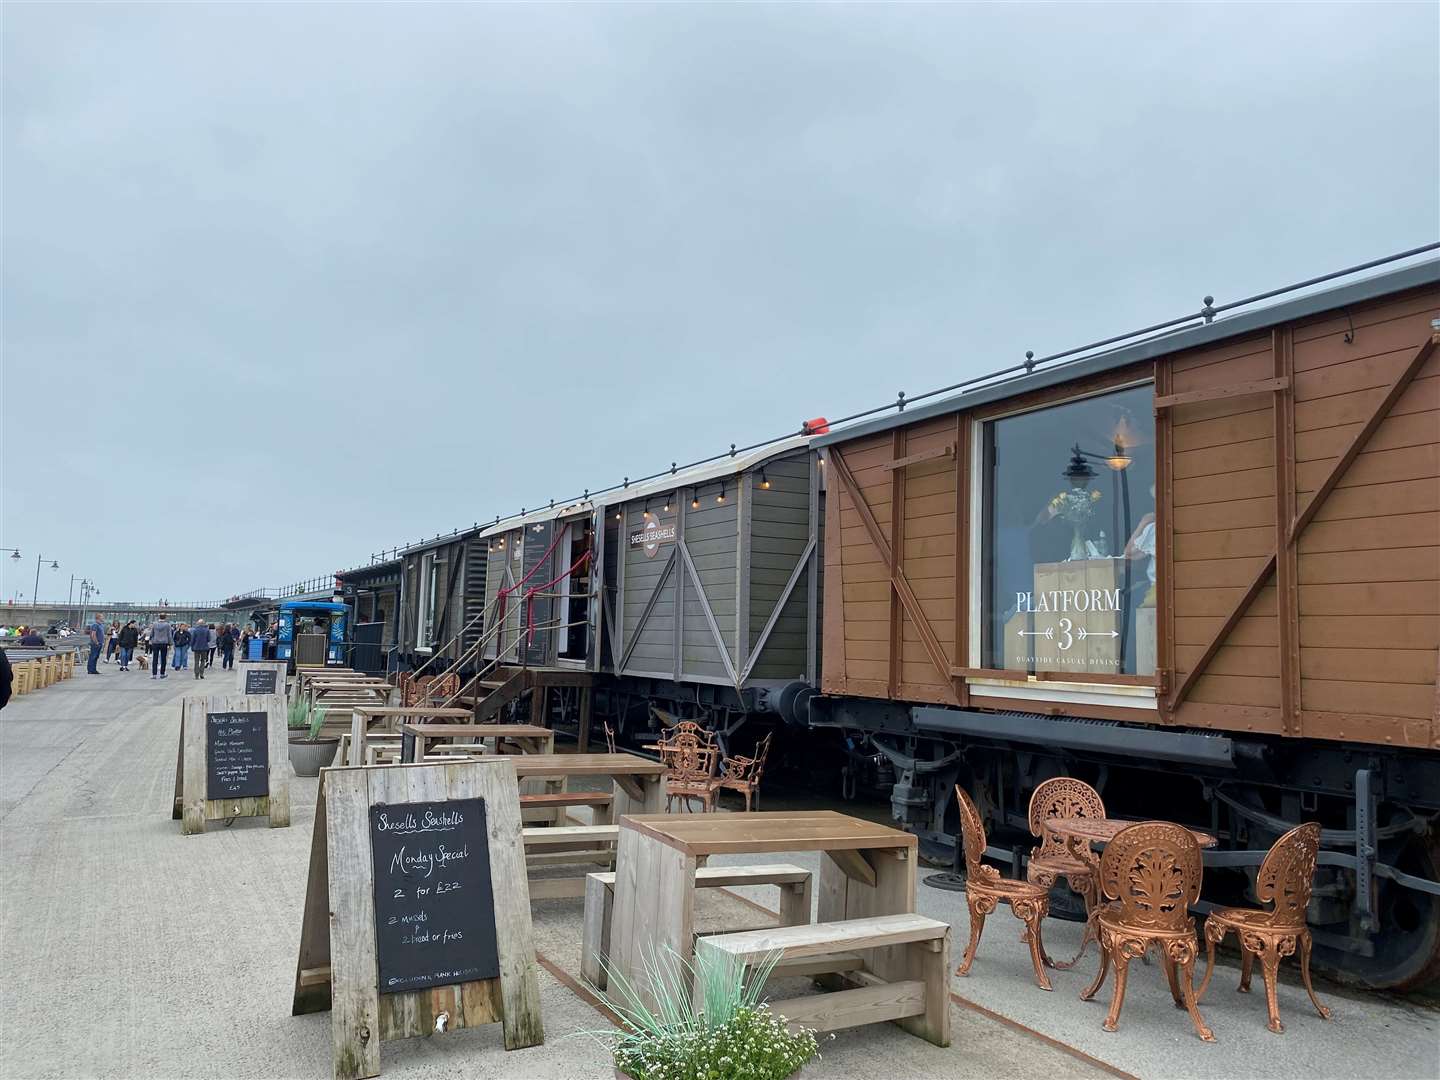 The applicant wants to install more train carriages on Folkestone Harbour Arm